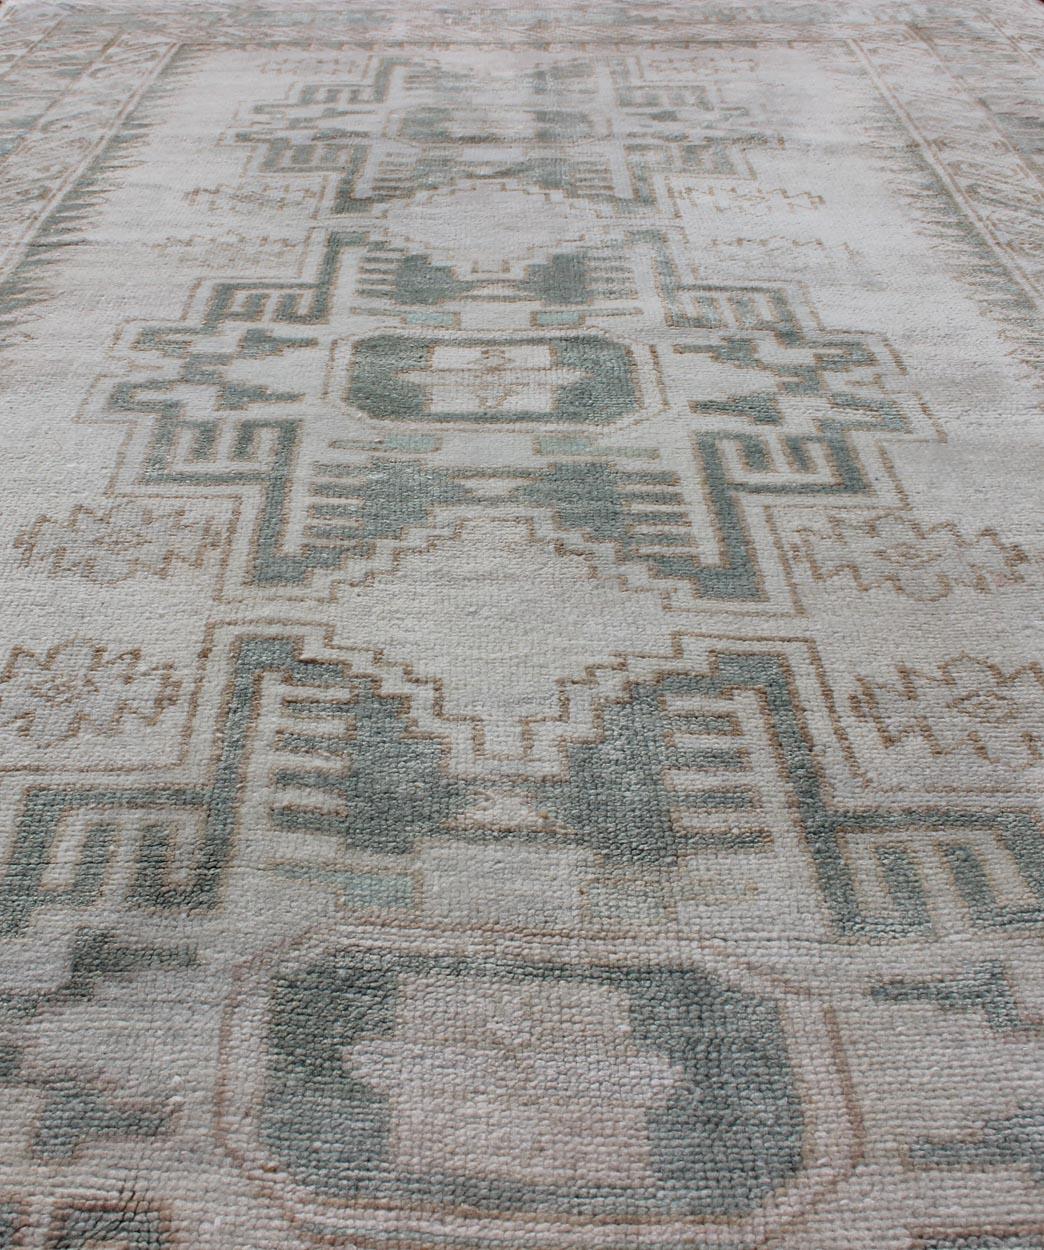 Vintage Turkish Oushak Rug with Central Medallions in Taupe and Light Green In Good Condition For Sale In Atlanta, GA